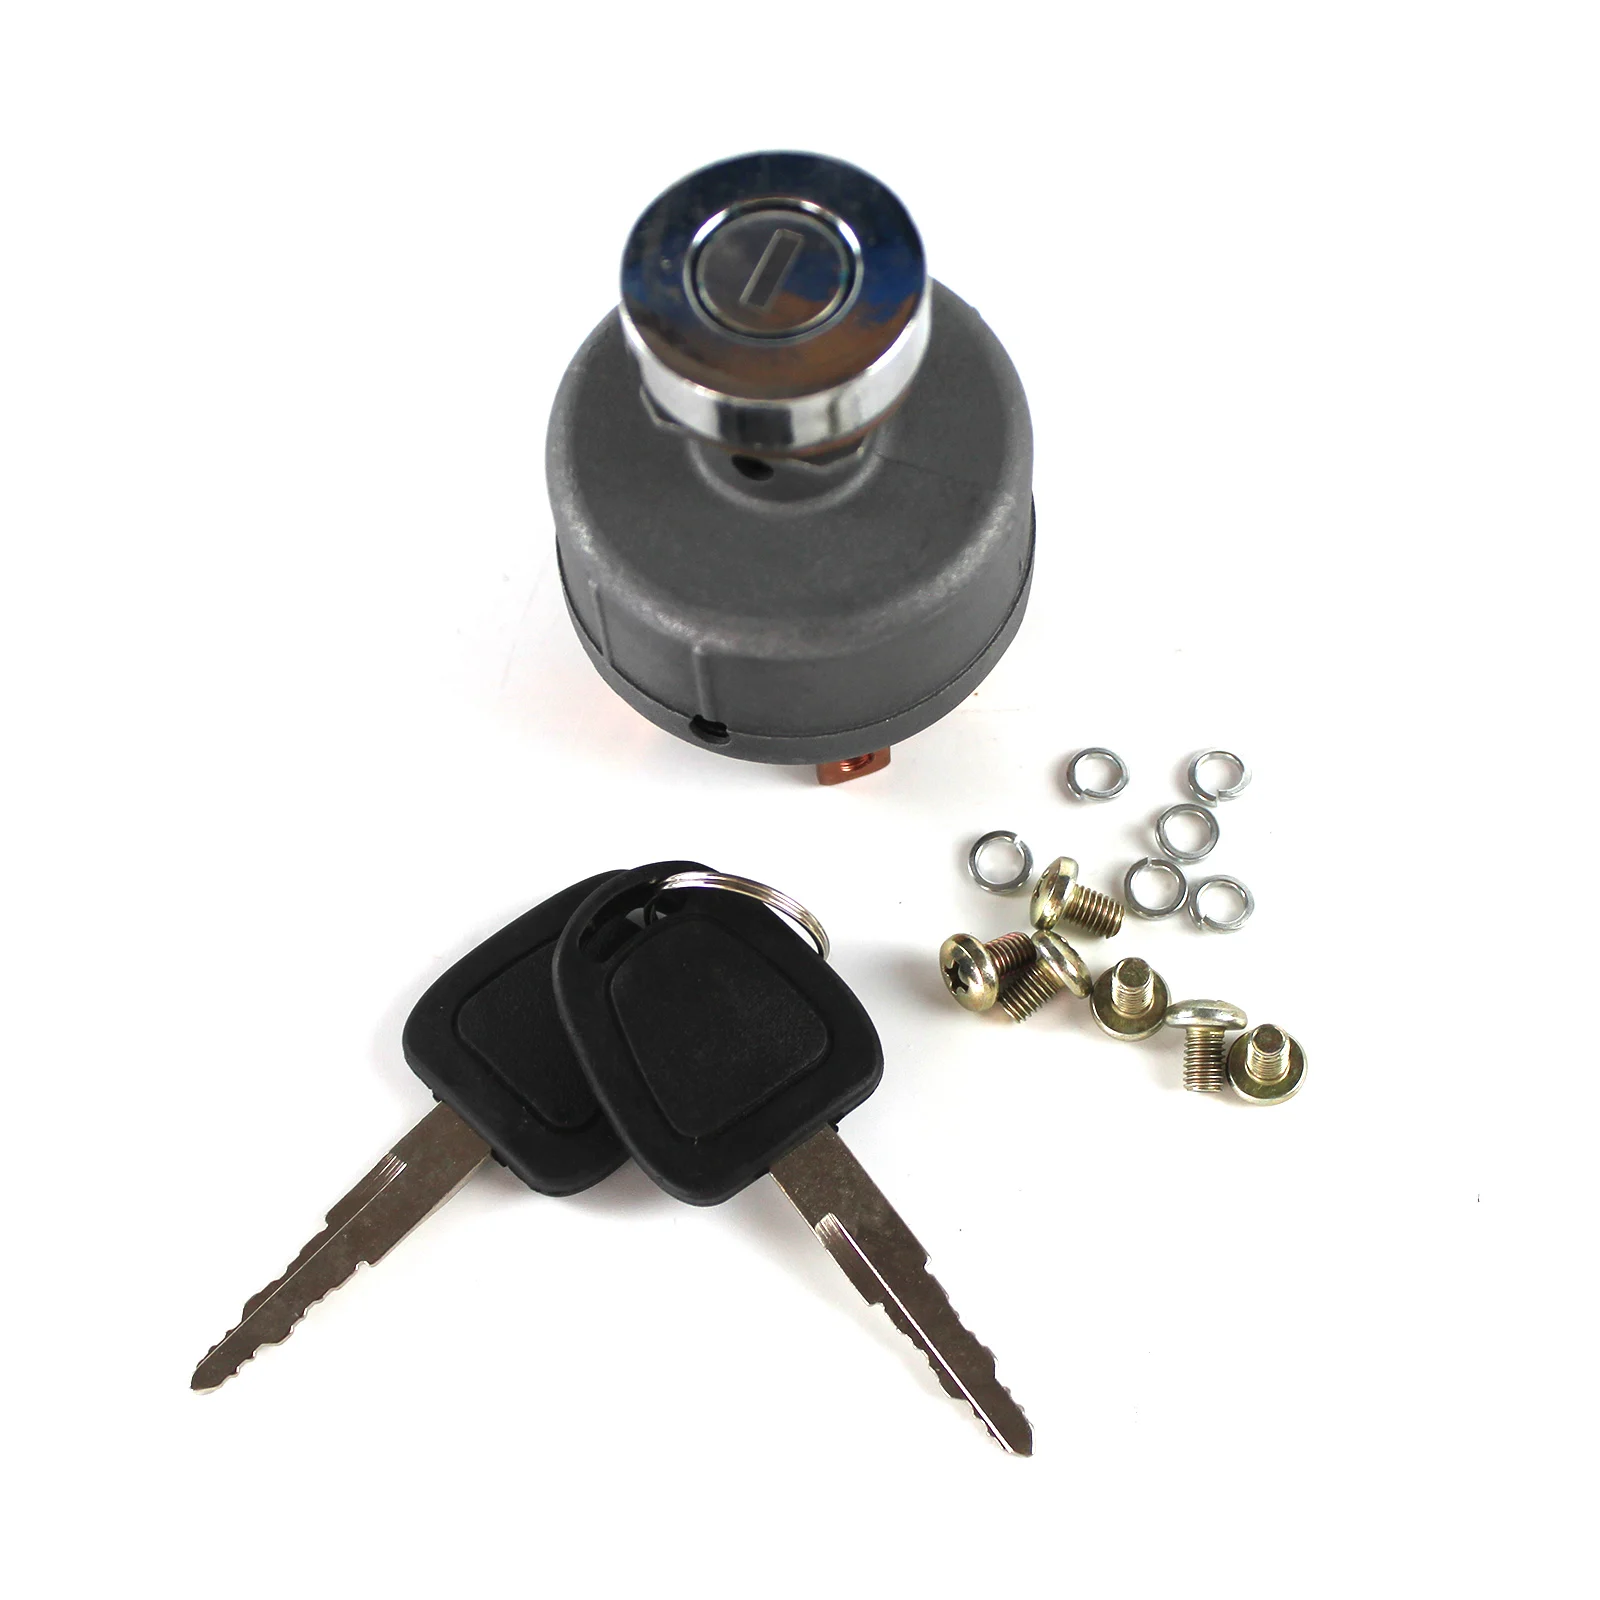 

Ignition Switch with 2 Keys for Doosan Daewoo DH220-7 DH220-5 DH220-2 DH220-3 DH220-5 S55 DH55-5 Excavator With 3 Month Warranty